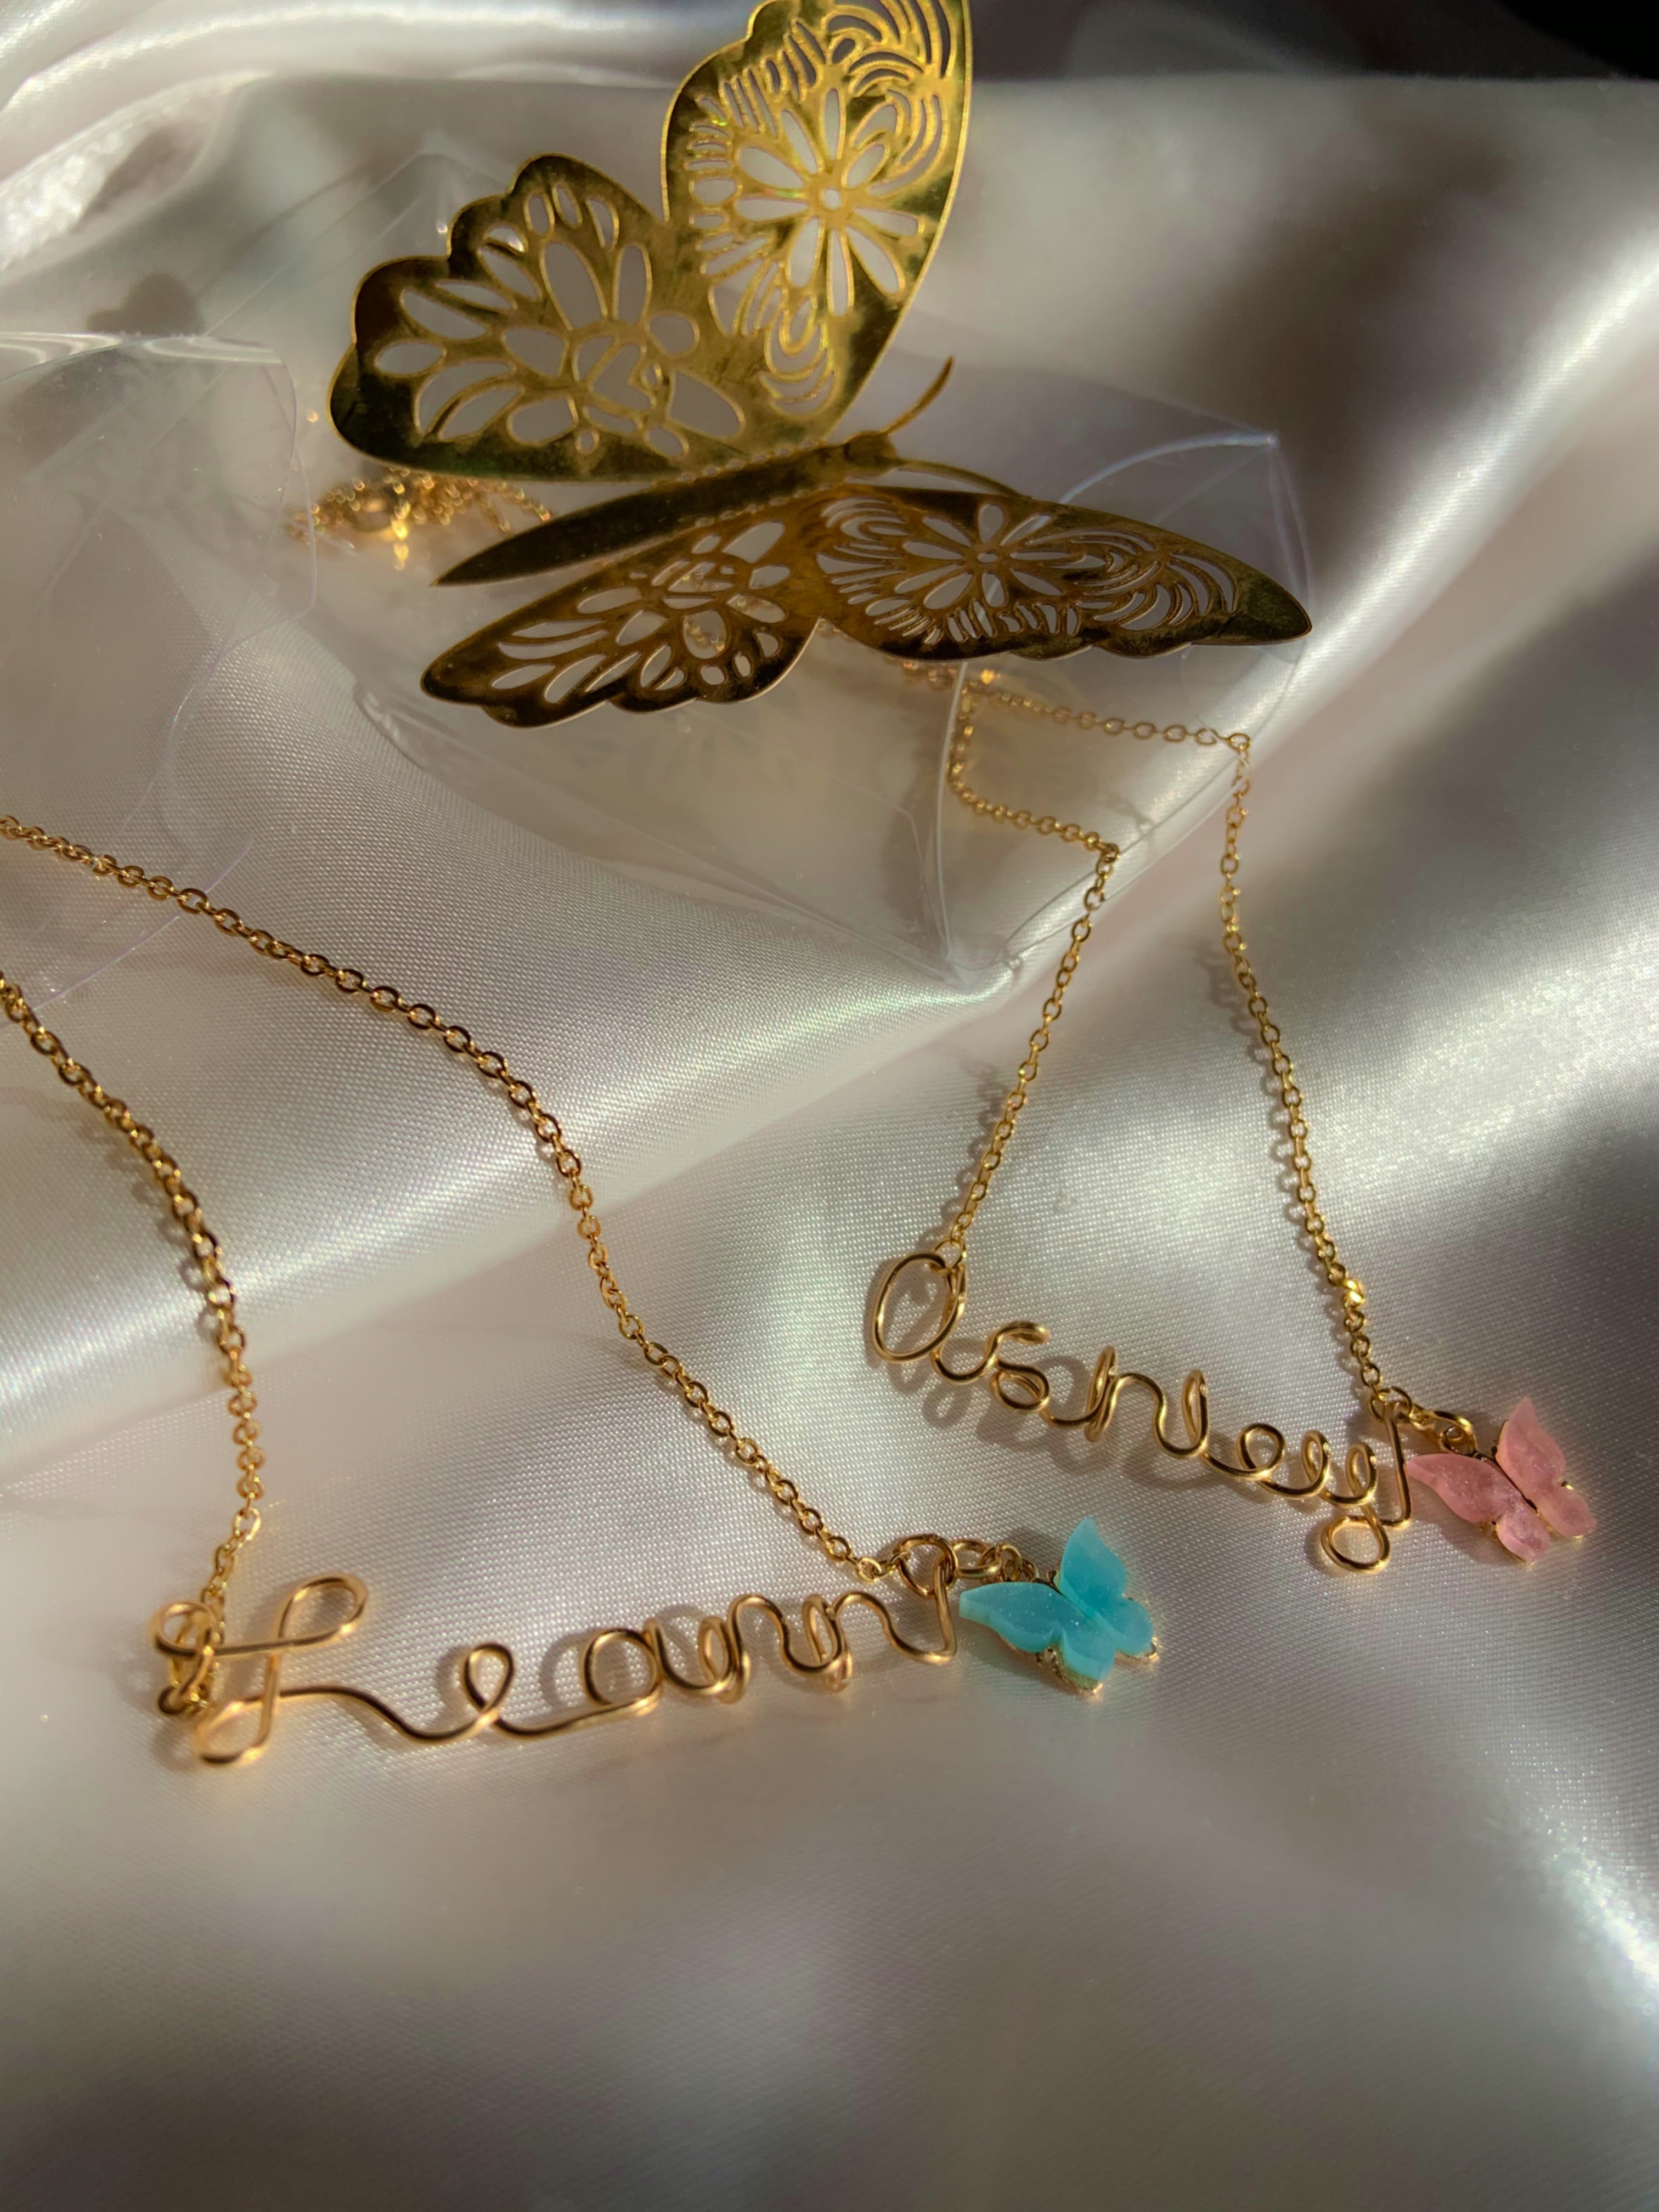 Two Butterfly Nameplate Personalized Custom Gold Plated Name Necklace  Couple Necklace BFF Gifts-silviax | Freundschaftsschmuck, Kette mit namen,  Beste freunde halskette